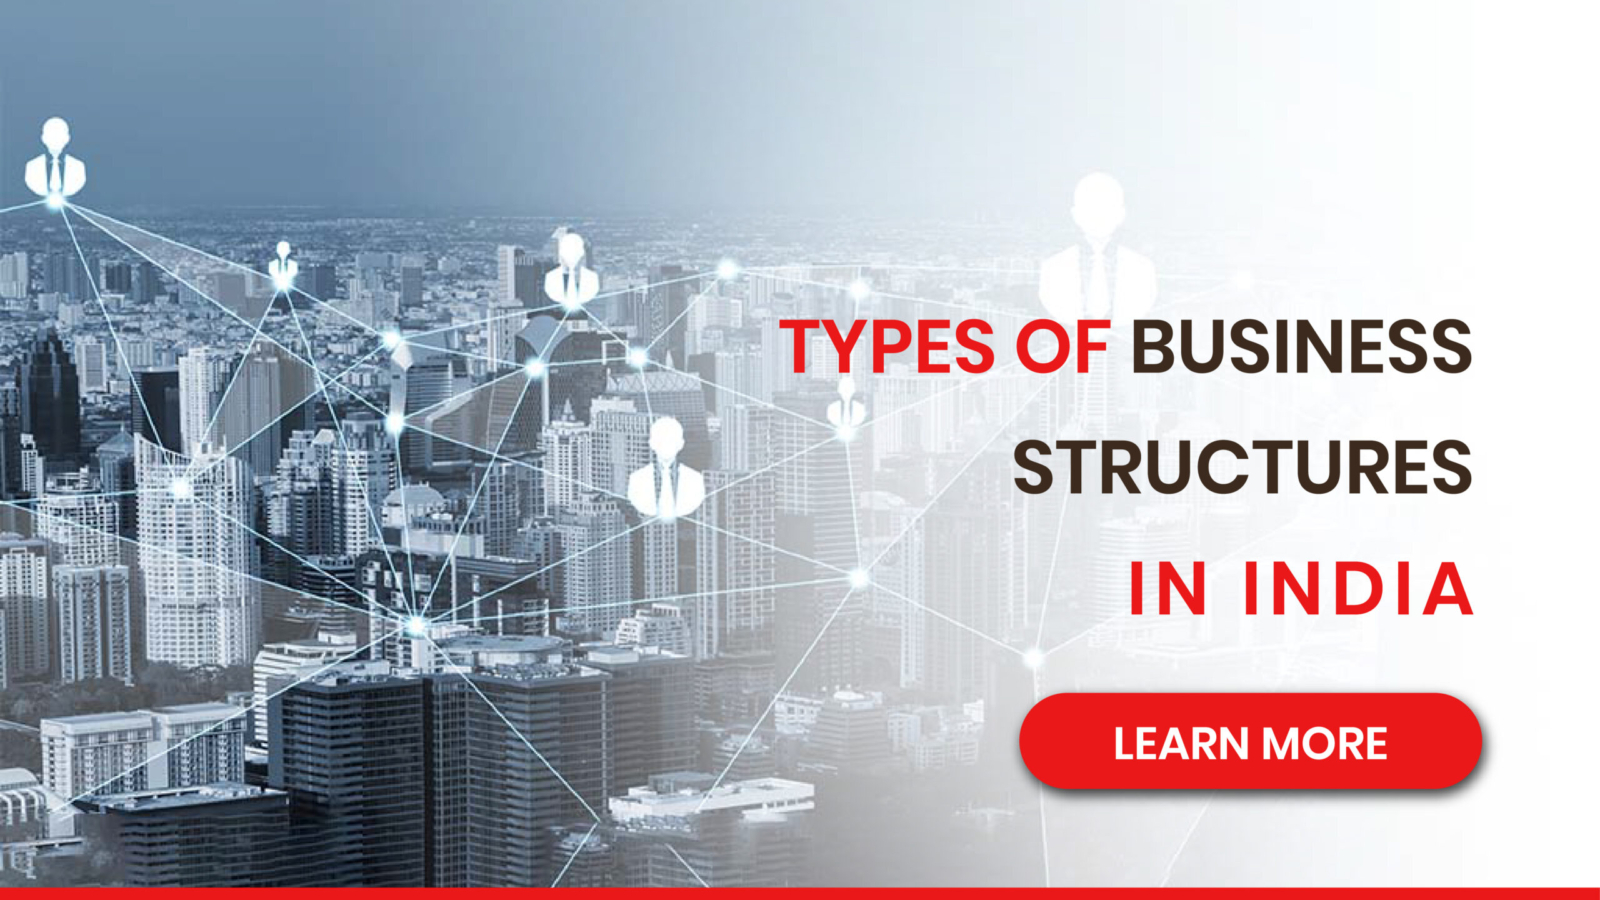 Types of Business Structures in India